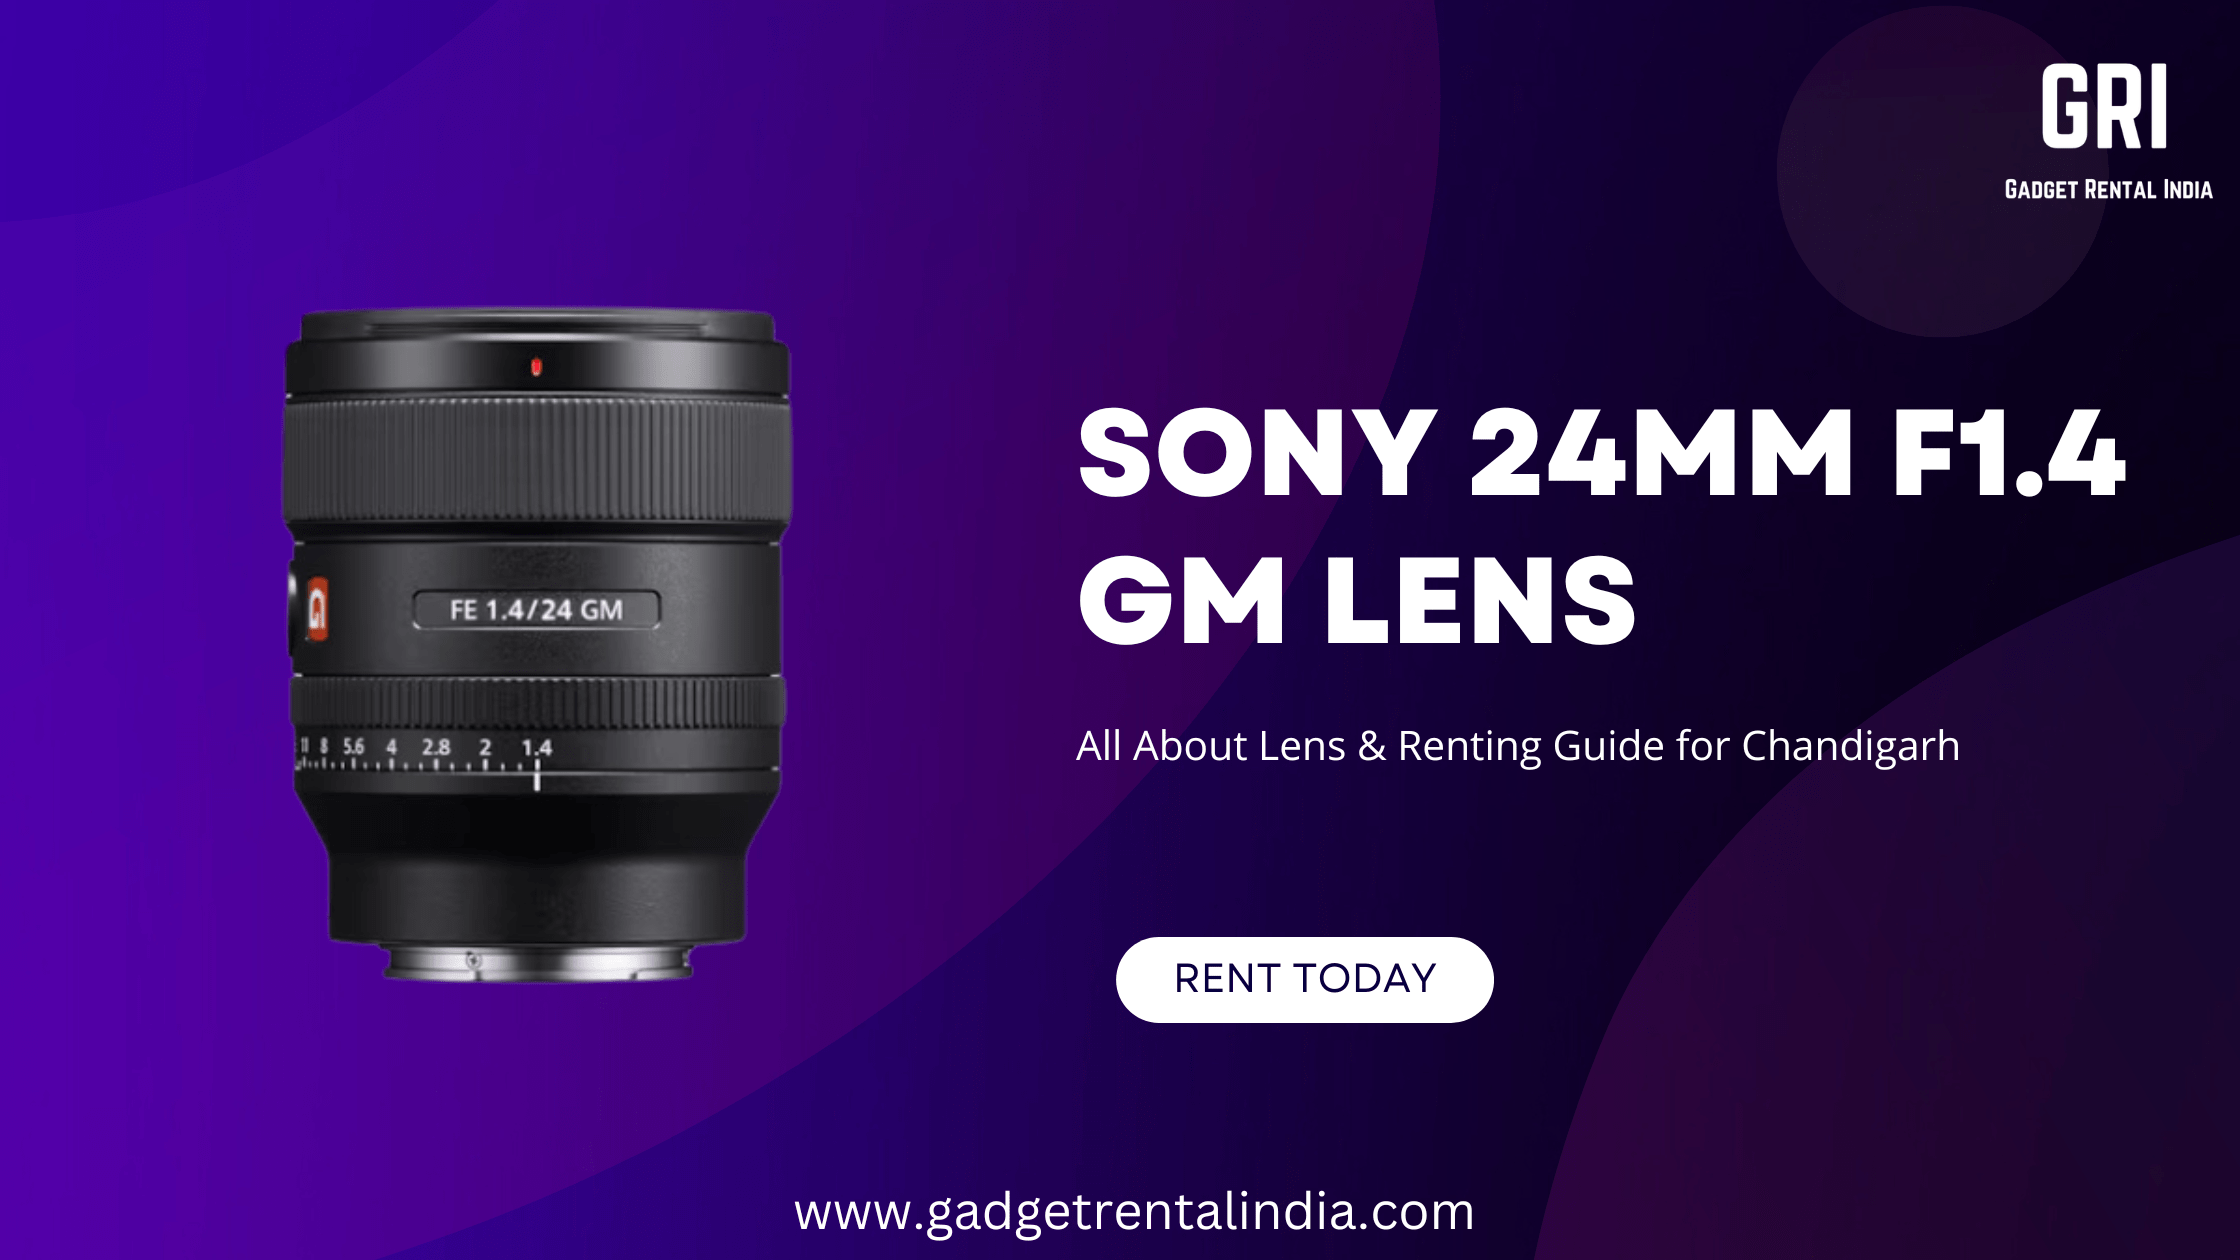 Explore Stunning Photography in Chandigarh with the Sony 24mm f1.4 GM Lens Rental | Gadget Rental India